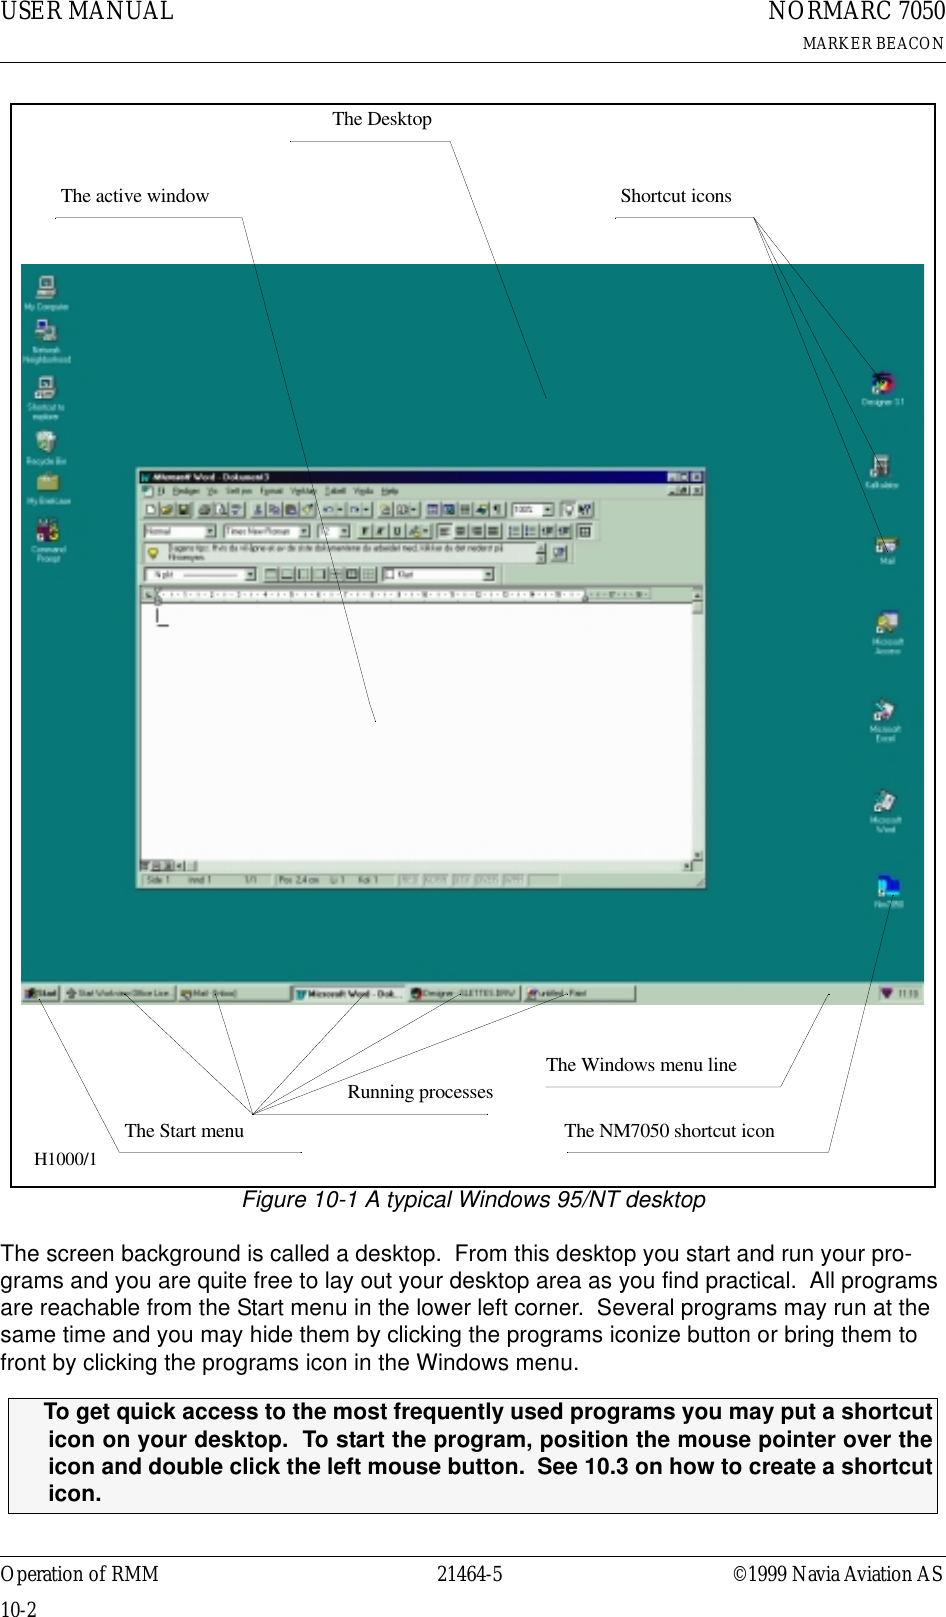 USER MANUAL10-221464-5NORMARC 7050MARKER BEACONOperation of RMM ©1999 Navia Aviation ASFigure 10-1 A typical Windows 95/NT desktopThe screen background is called a desktop.  From this desktop you start and run your pro-grams and you are quite free to lay out your desktop area as you find practical.  All programs are reachable from the Start menu in the lower left corner.  Several programs may run at the same time and you may hide them by clicking the programs iconize button or bring them to front by clicking the programs icon in the Windows menu.ΤTo get quick access to the most frequently used programs you may put a shortcuticon on your desktop.  To start the program, position the mouse pointer over theicon and double click the left mouse button.  See 10.3 on how to create a shortcuticon.The active window Shortcut iconsThe NM7050 shortcut iconThe Start menuThe Windows menu lineThe DesktopRunning processesH1000/1